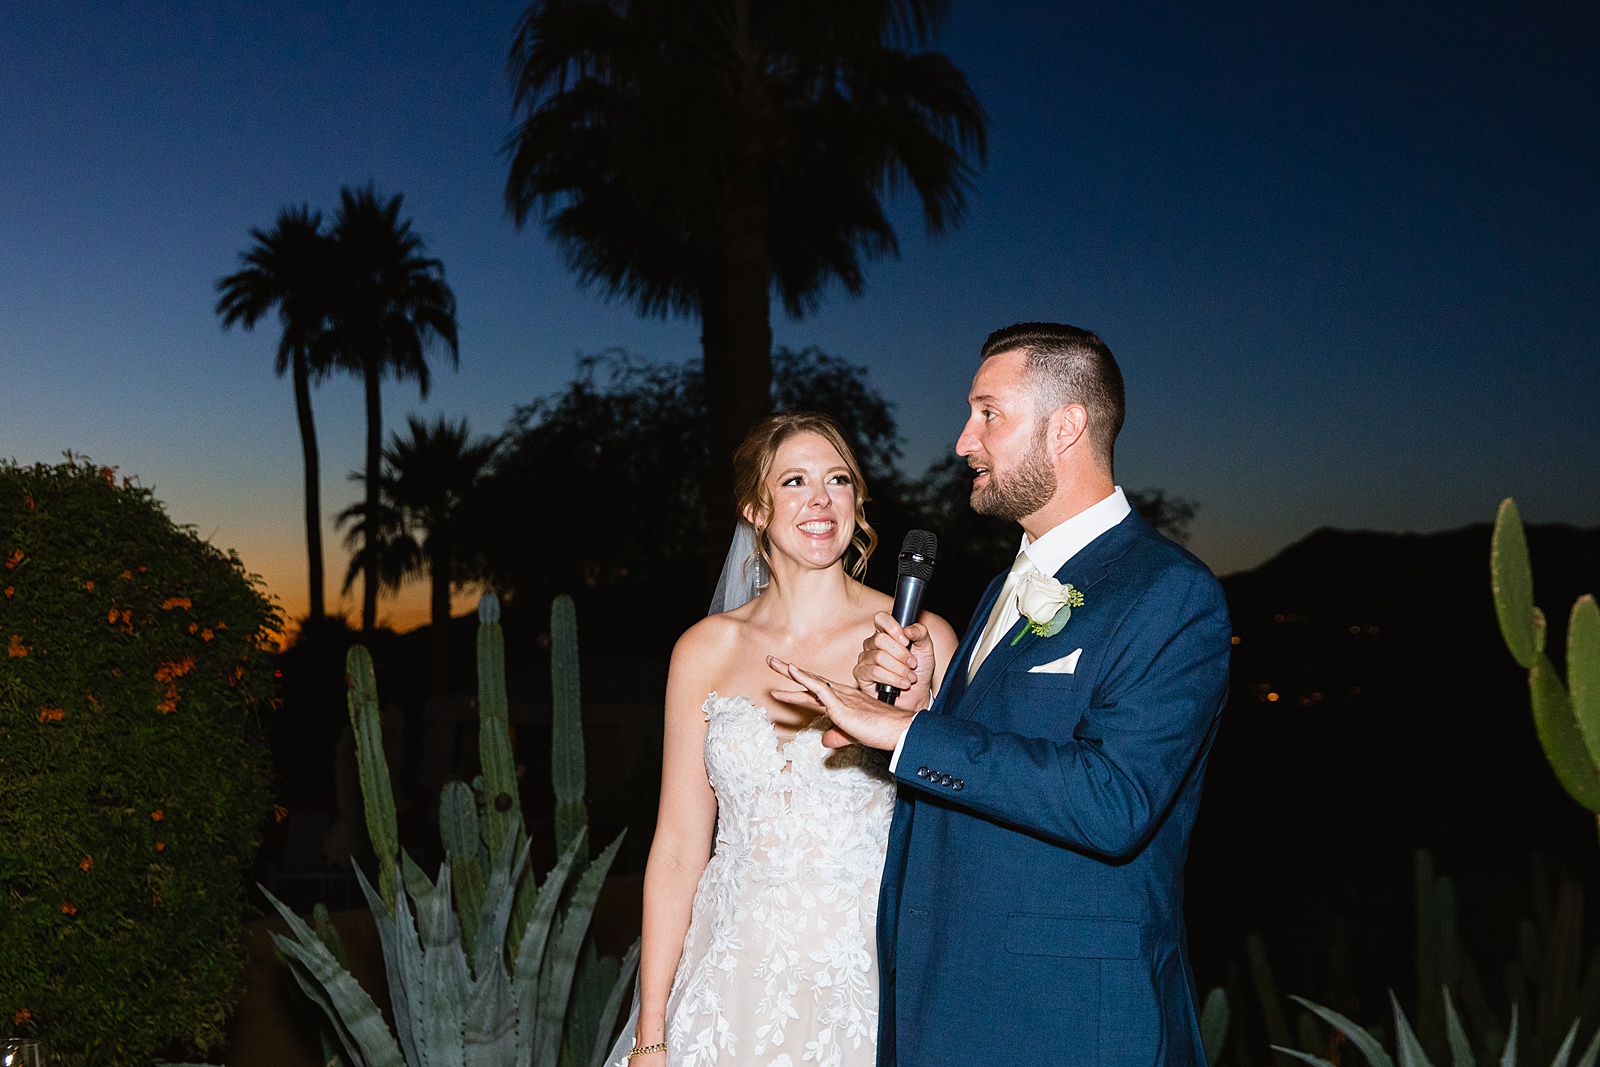 Bride & Groom sharing a toast at their Sanctuary at Camelback wedding reception by Arizona wedding photographer Juniper and Co Photography.